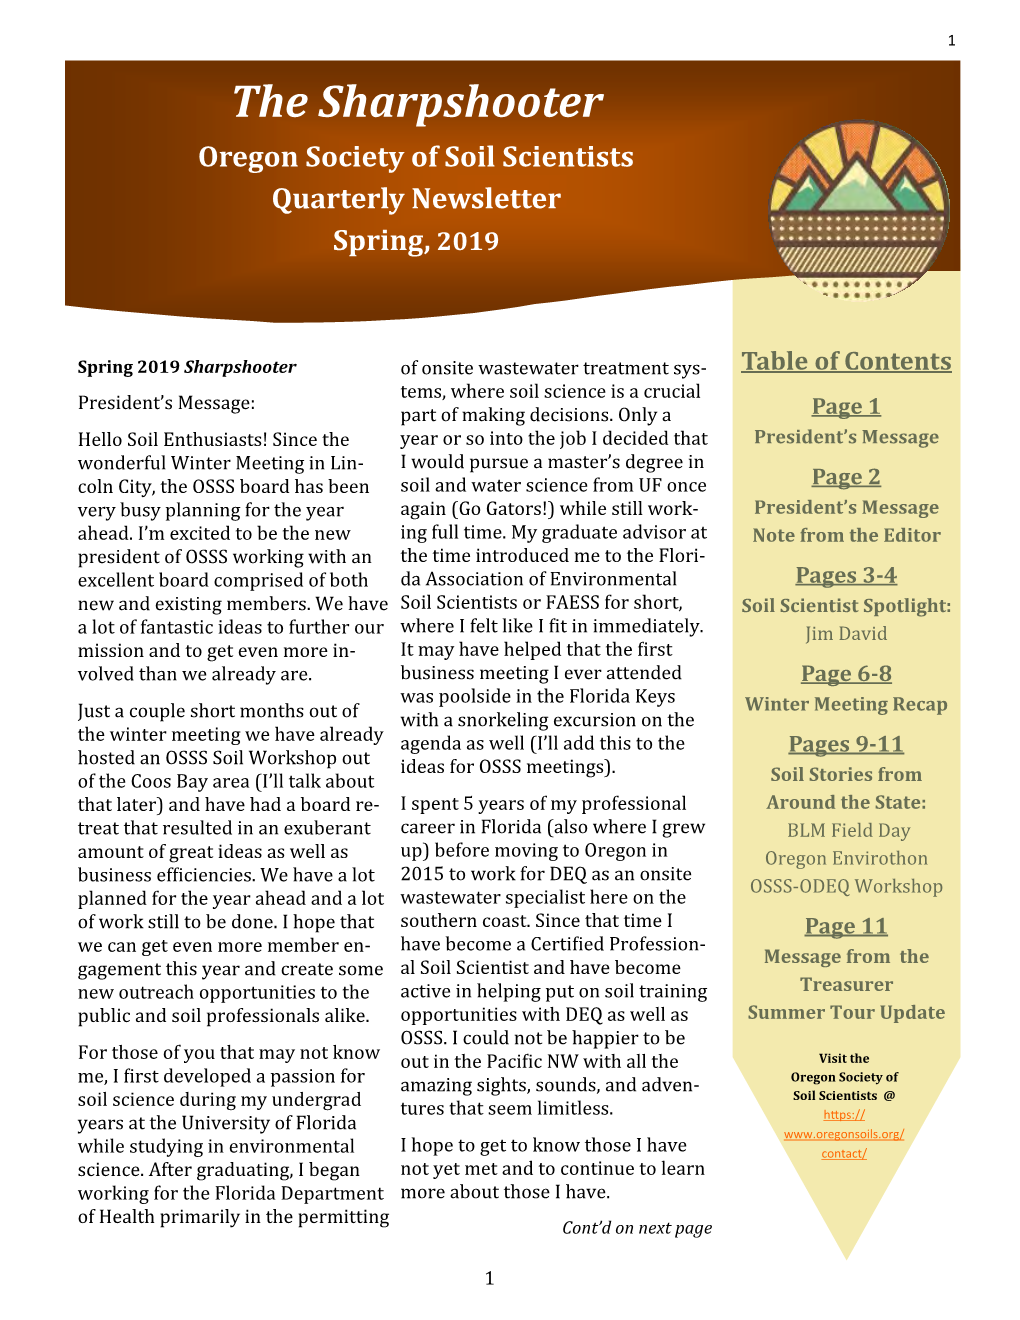 The Sharpshooter Oregon Society of Soil Scientists Quarterly Newsletter Spring, 2019